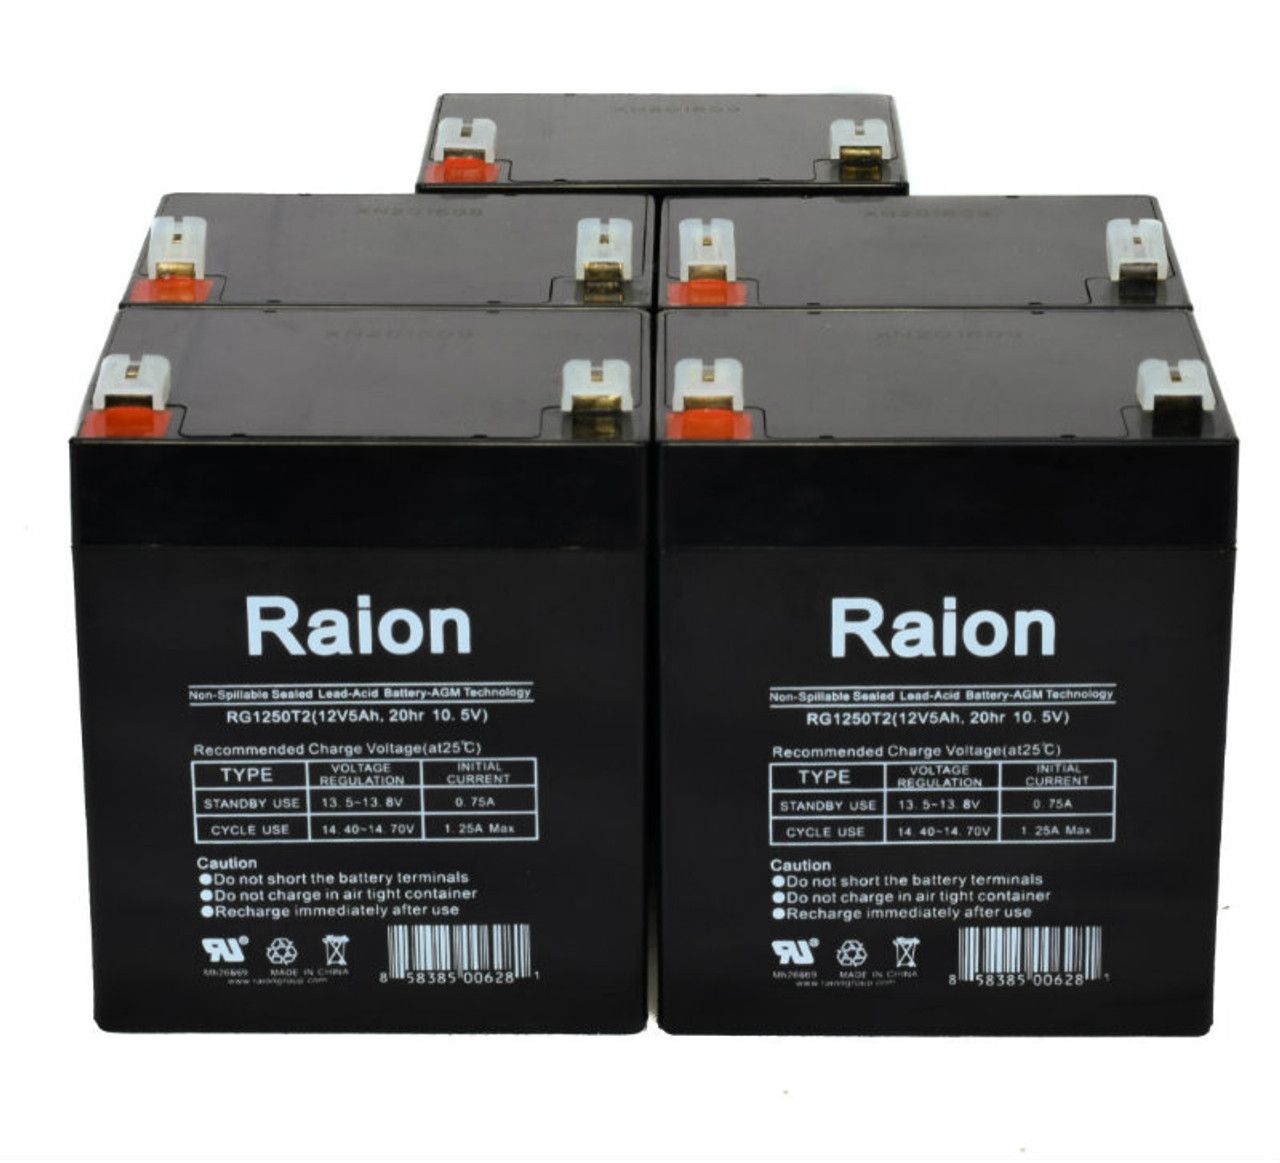 Raion Power 12V 5Ah RG1250T2 Replacement Lead Acid Battery for RIMA UN5-12 - 5 Pack